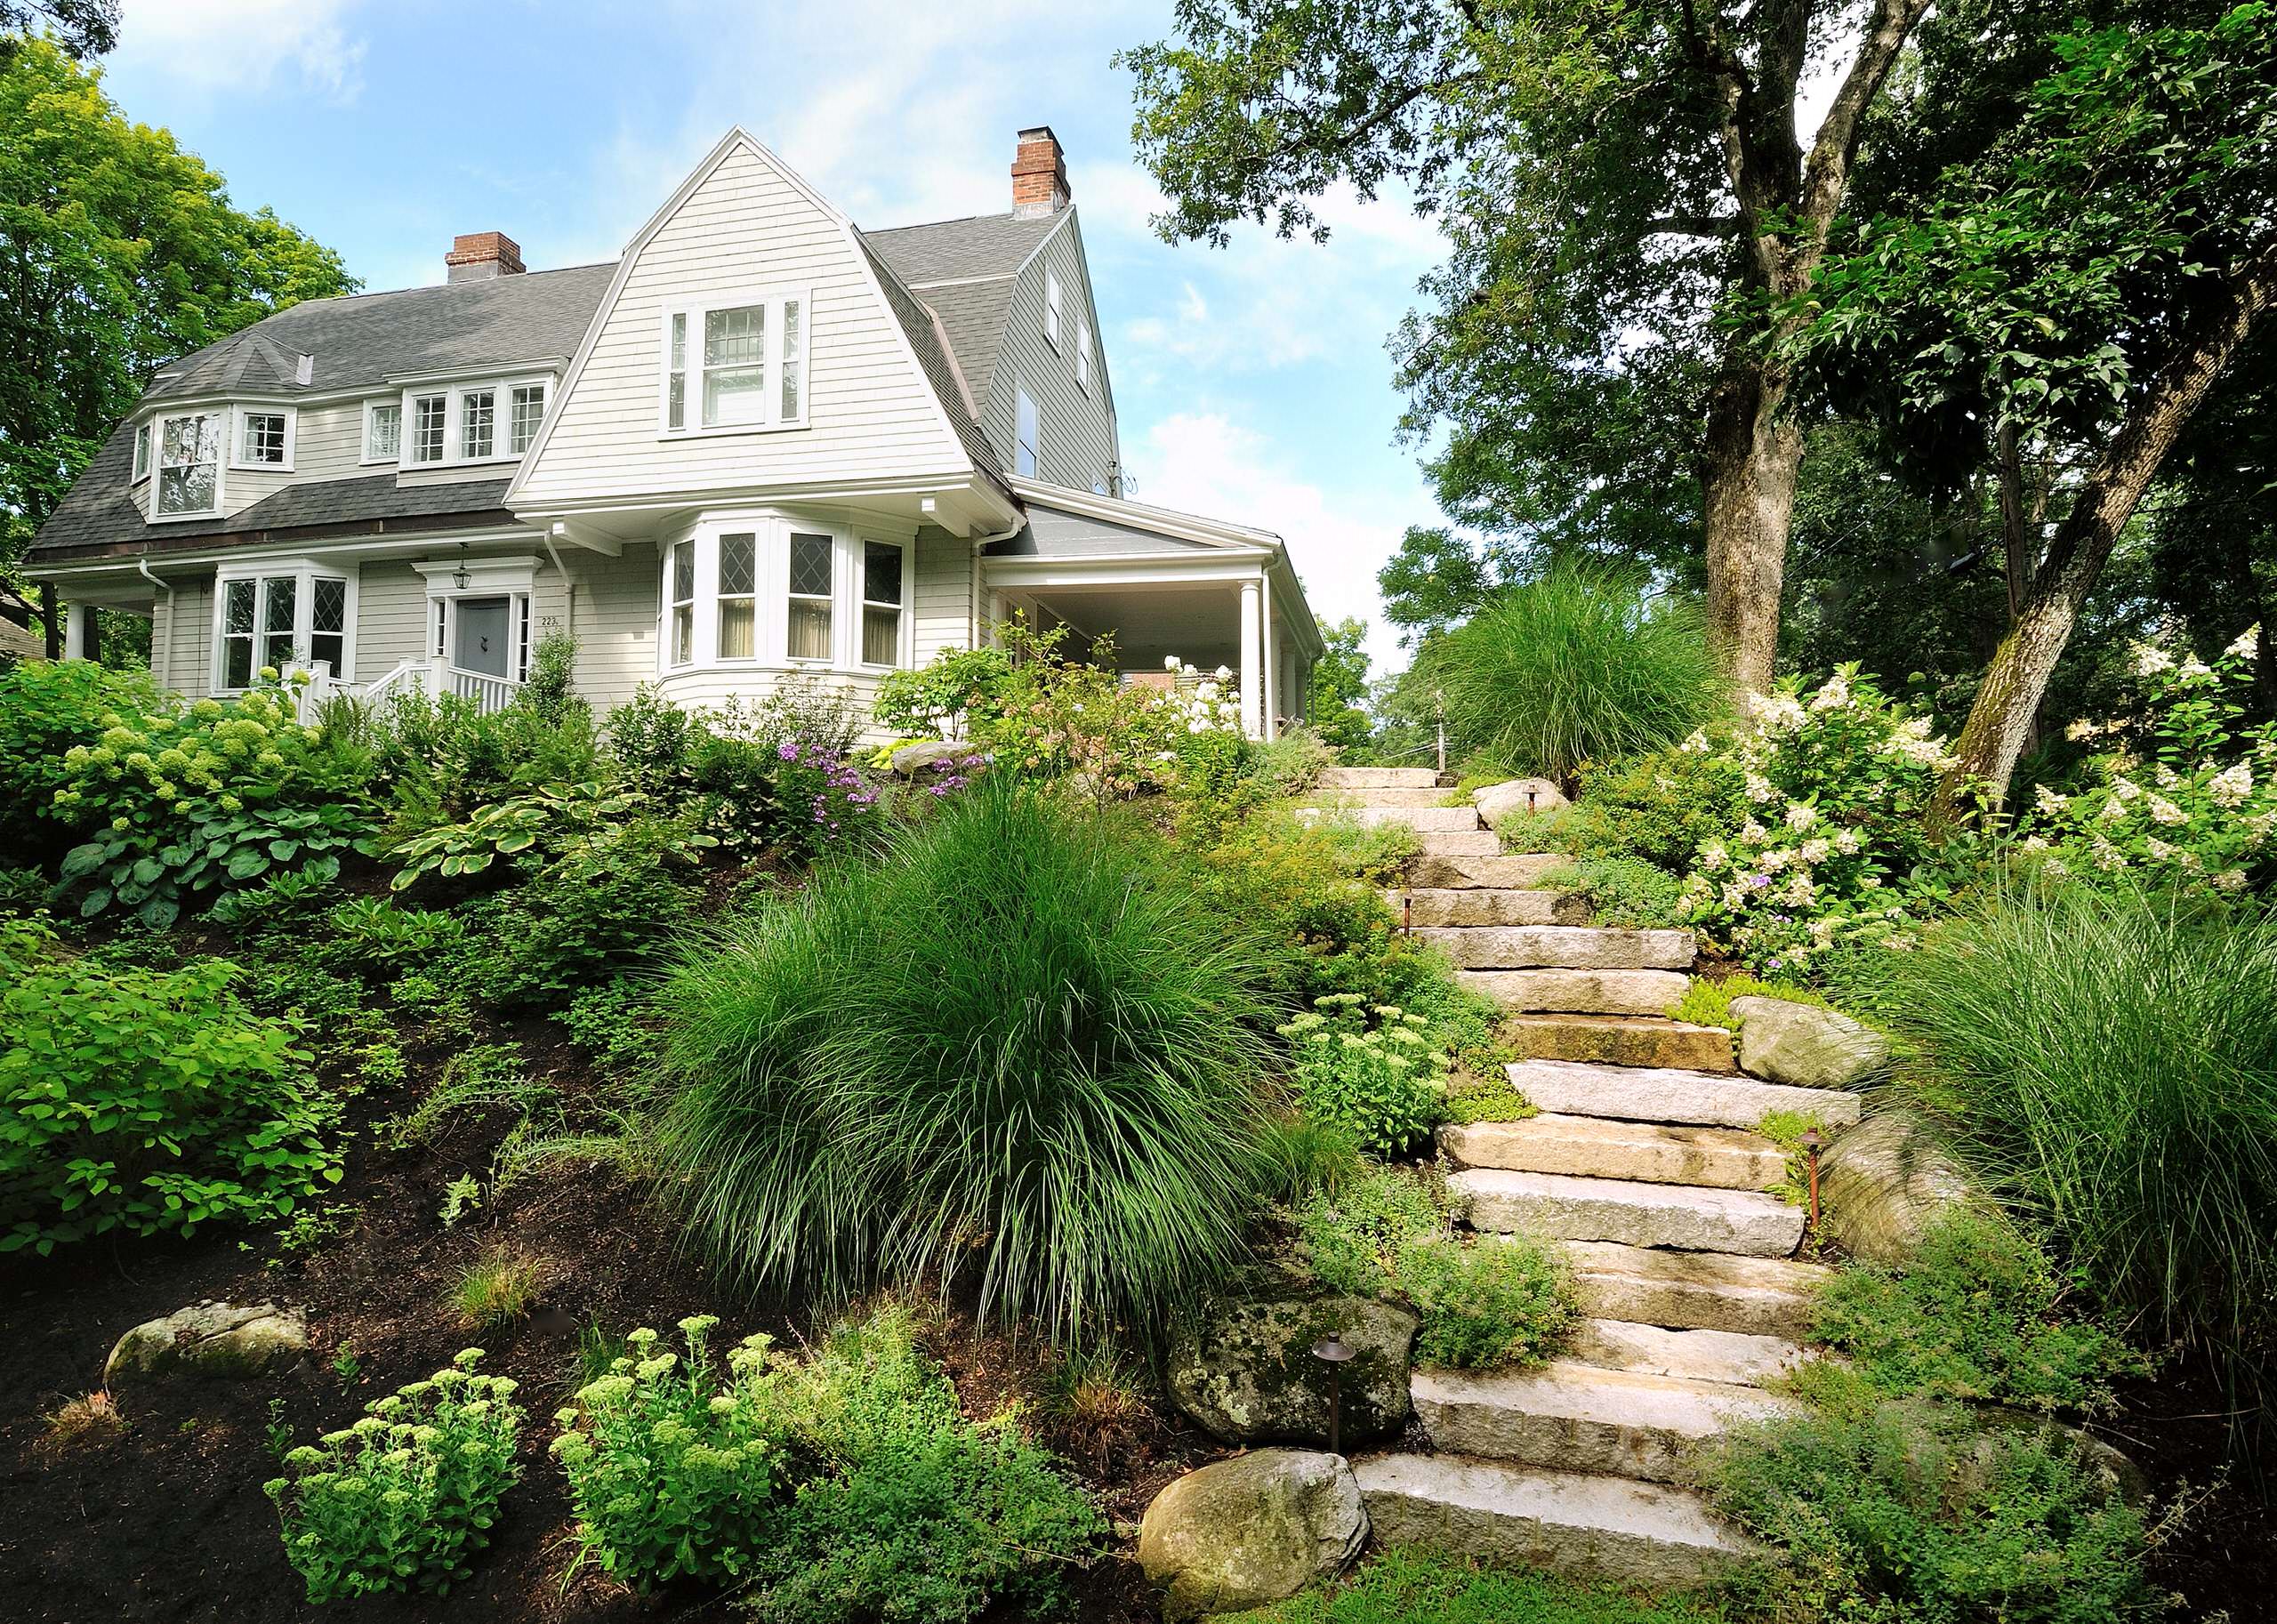 Steep Slope Landscaping Houzz, Steep Hill Backyard Landscaping Ideas